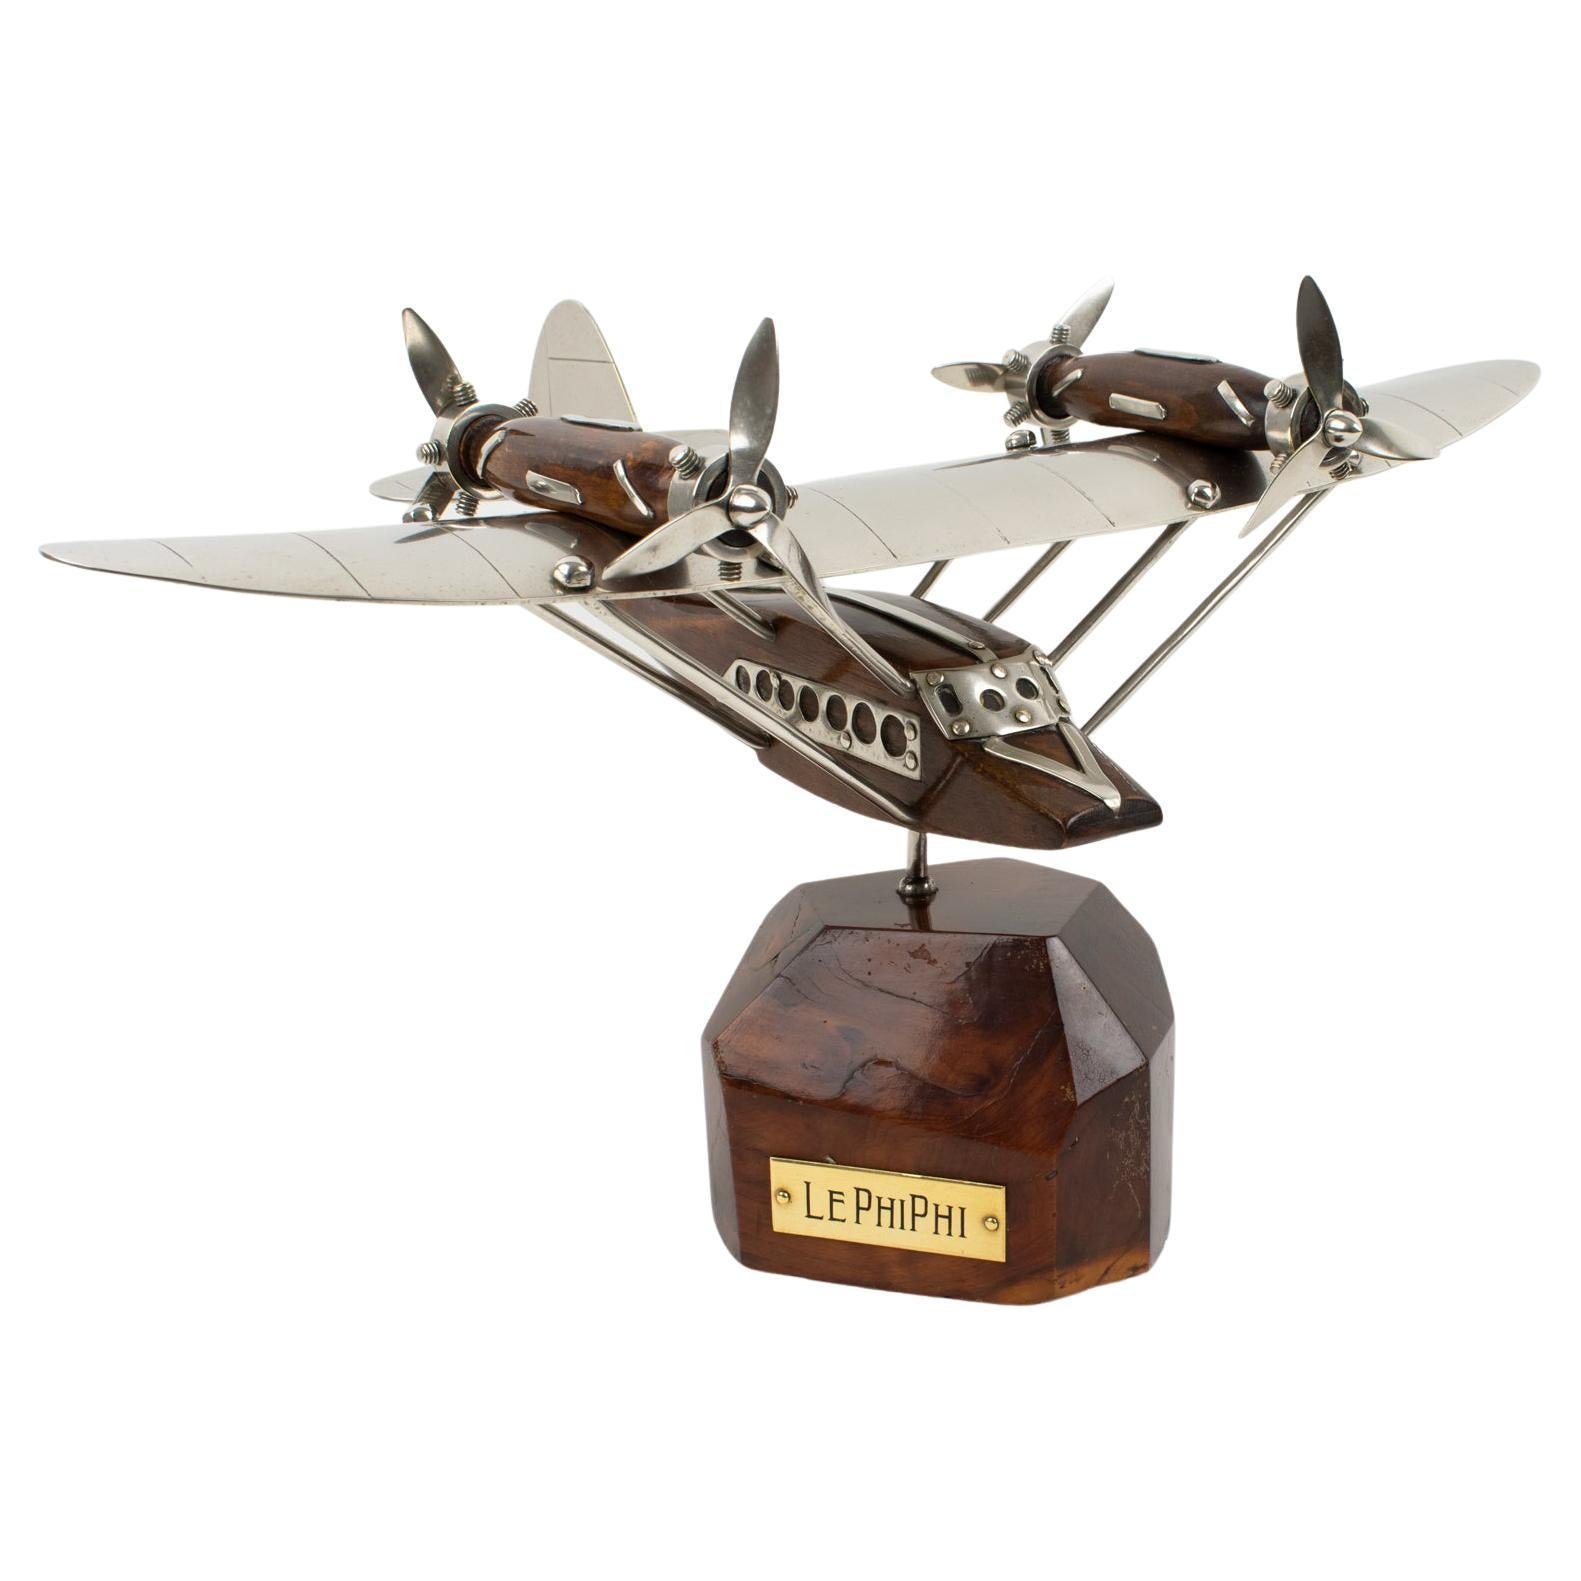 French Art Deco, 1940s Wooden and Chrome Airplane SeaPlane Aviation Model